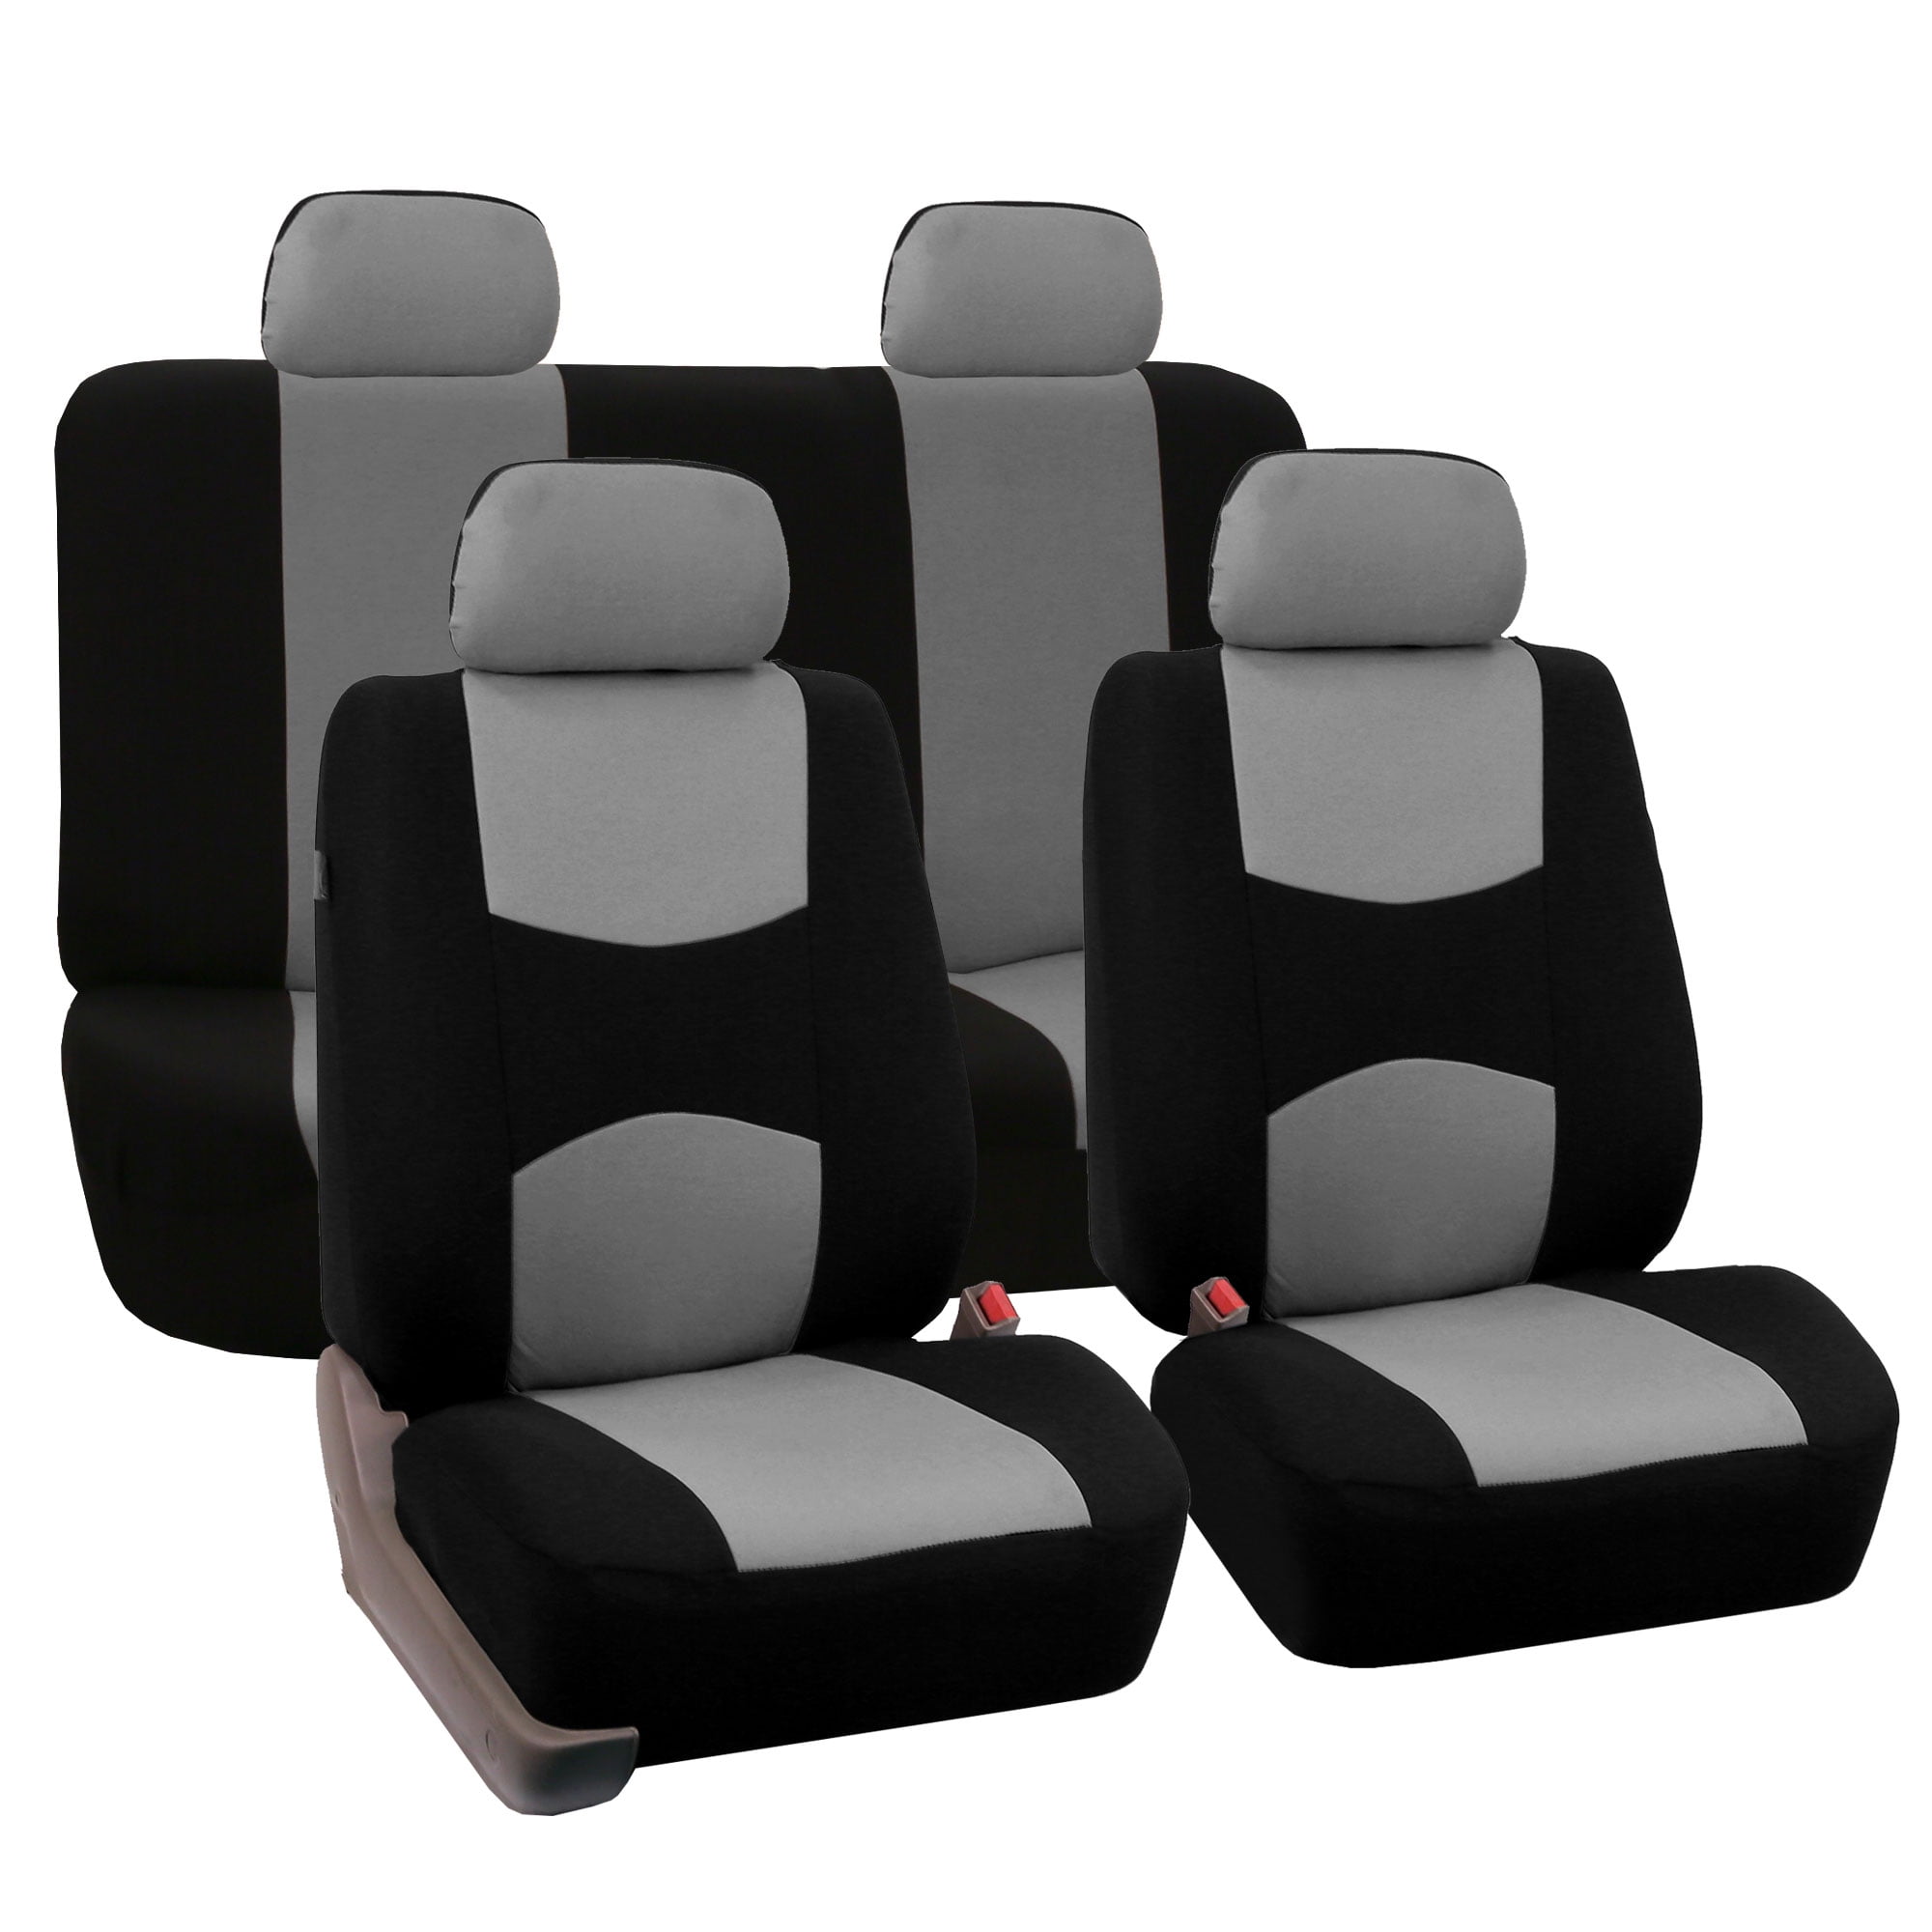 Truck SUV Fit Most Car or Van FH Group FH-FB063115 Full Set Sports Fabric Car Seat Covers Solid Black Airbag Compatible and Split Bench